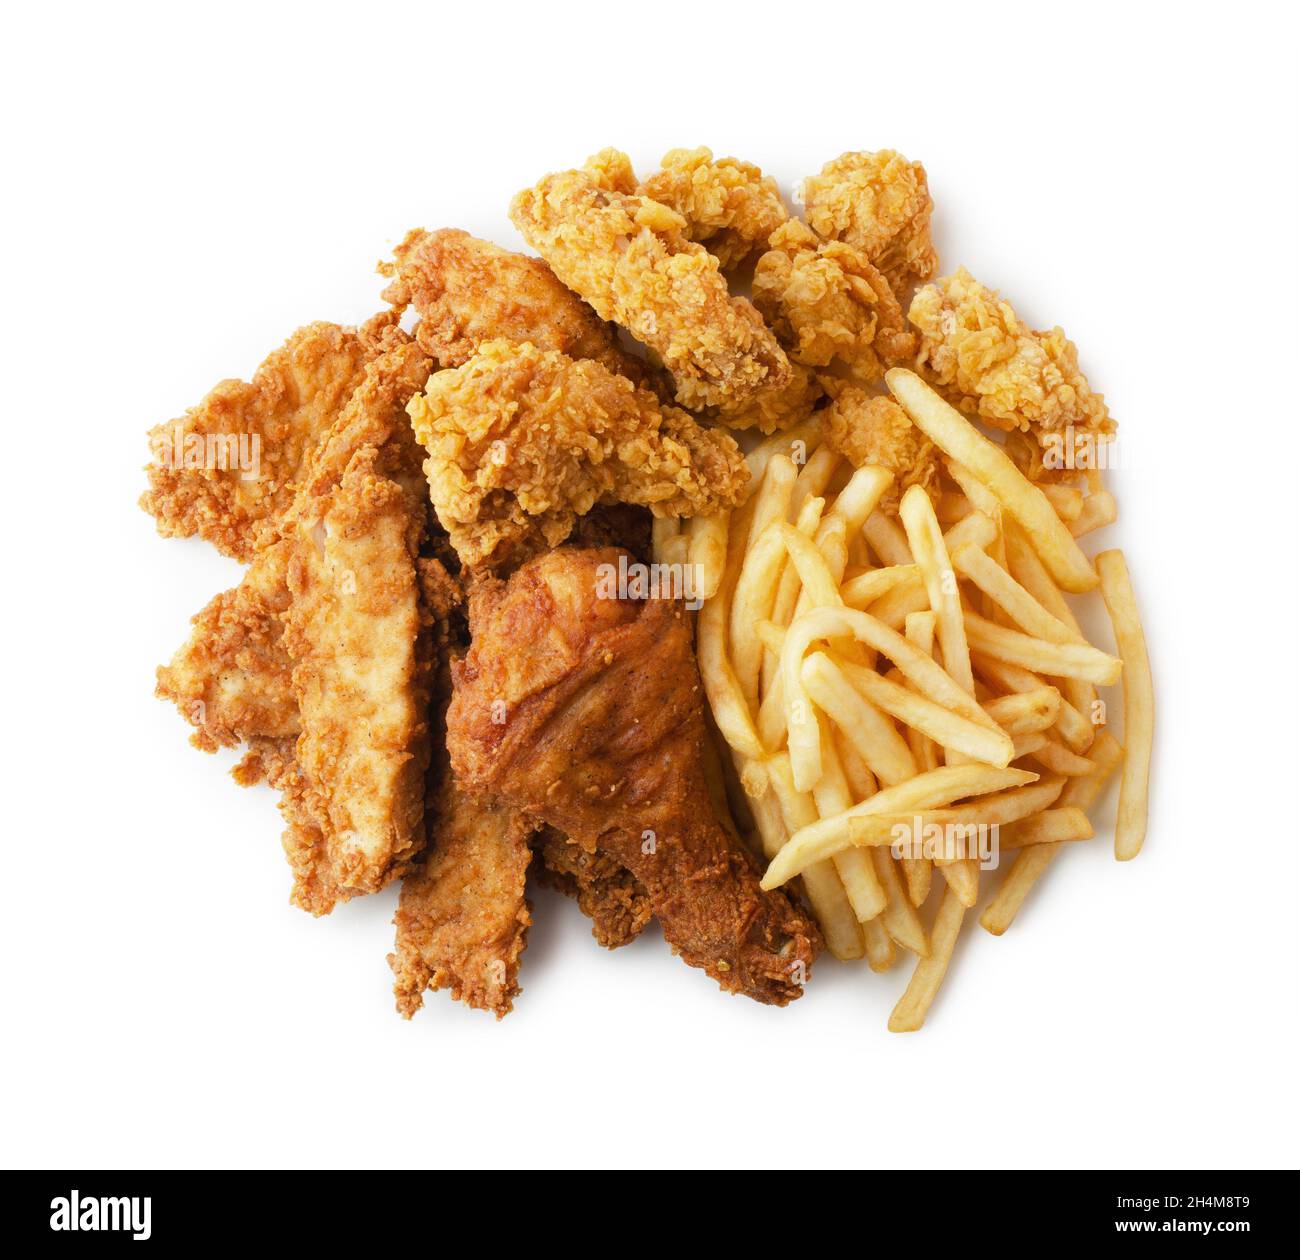 Fried chicken with frech fries, breaded drumsticks and nuggets isolated on white background. Beer set. Stock Photo